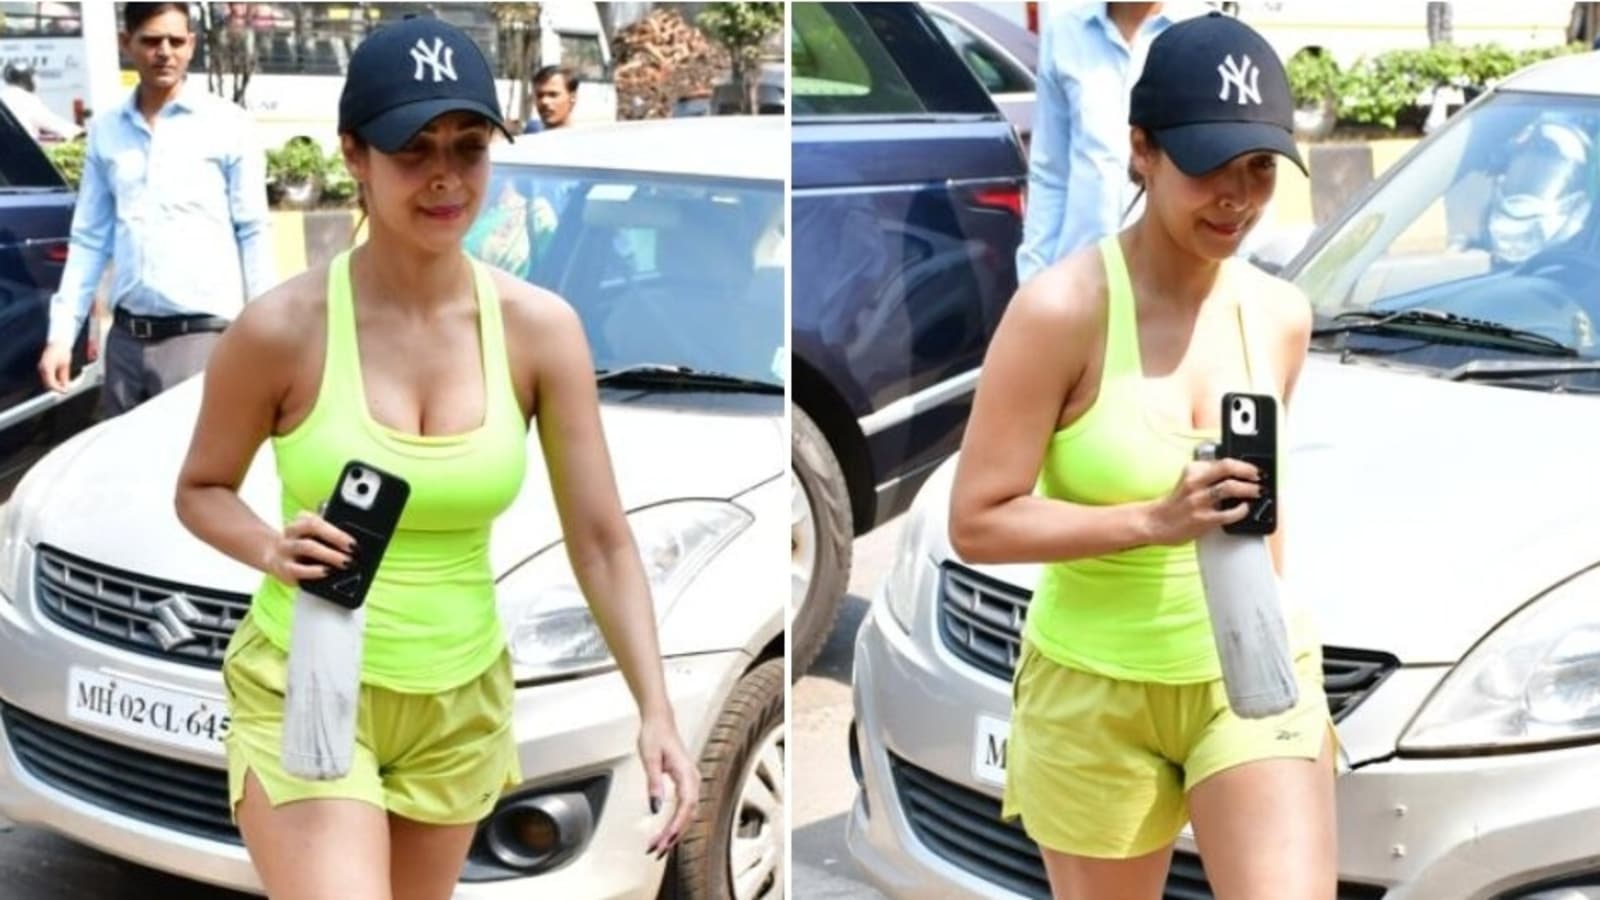 Malaika Arora highlights her love for neon as she aces another gym look in tank top and shorts: See pics, videos